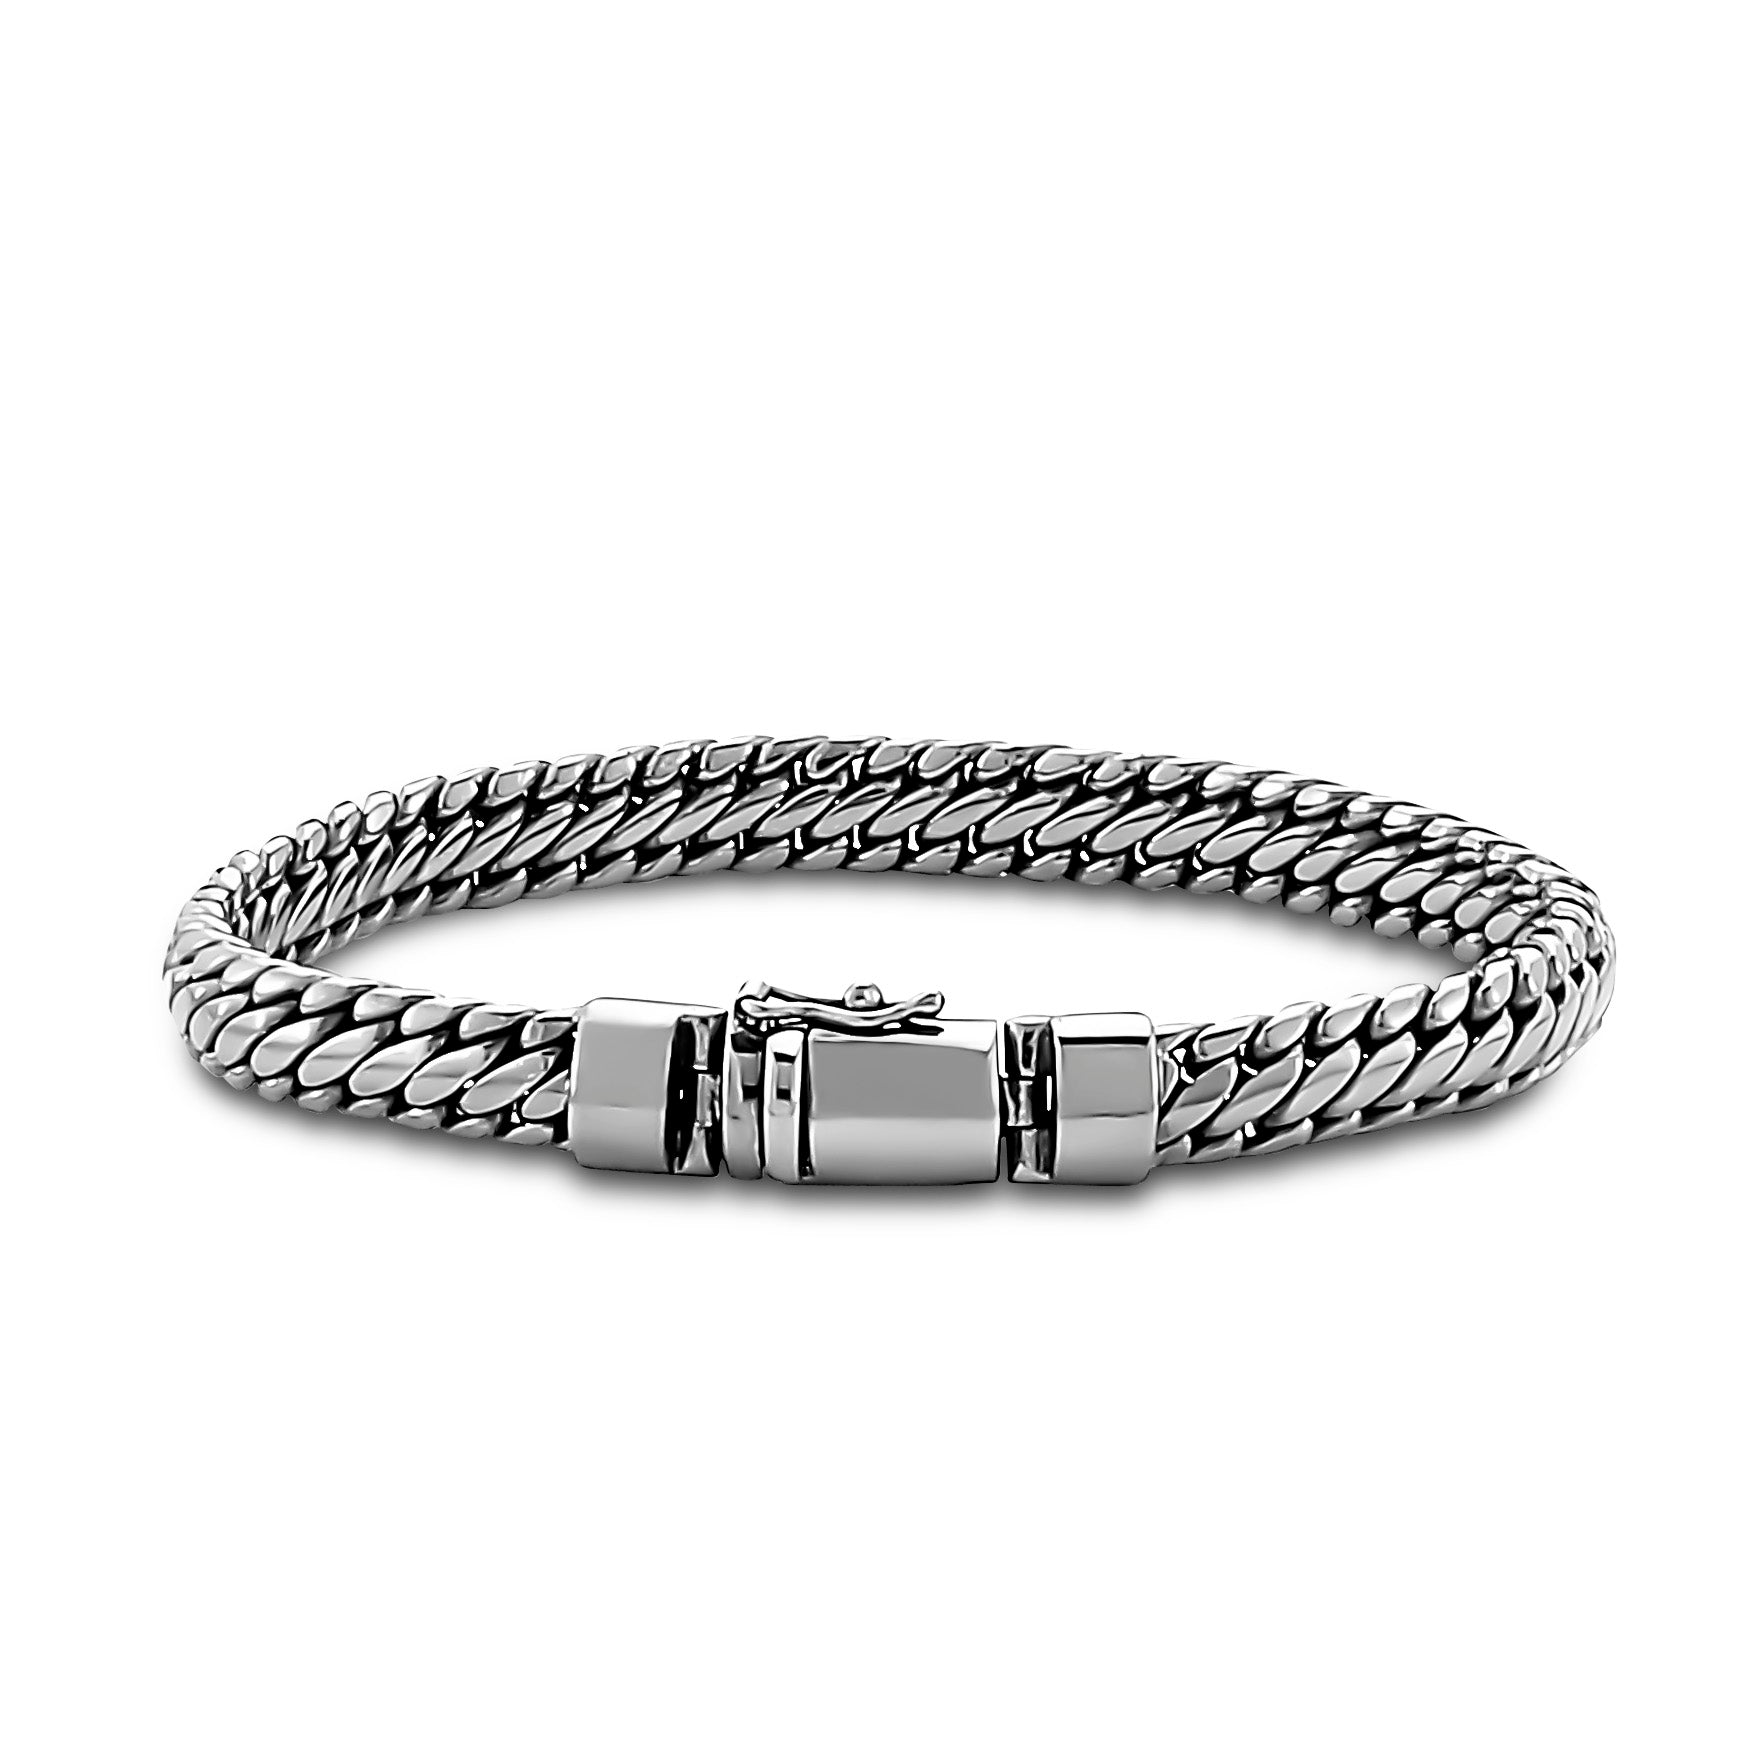 Black Rhodium Men's Bracelet available at Talisman Collection Fine Jewelers in El Dorado Hills, CA and online. Specs: Black rhodium men’s bracelet crafted in Sterling Silver.